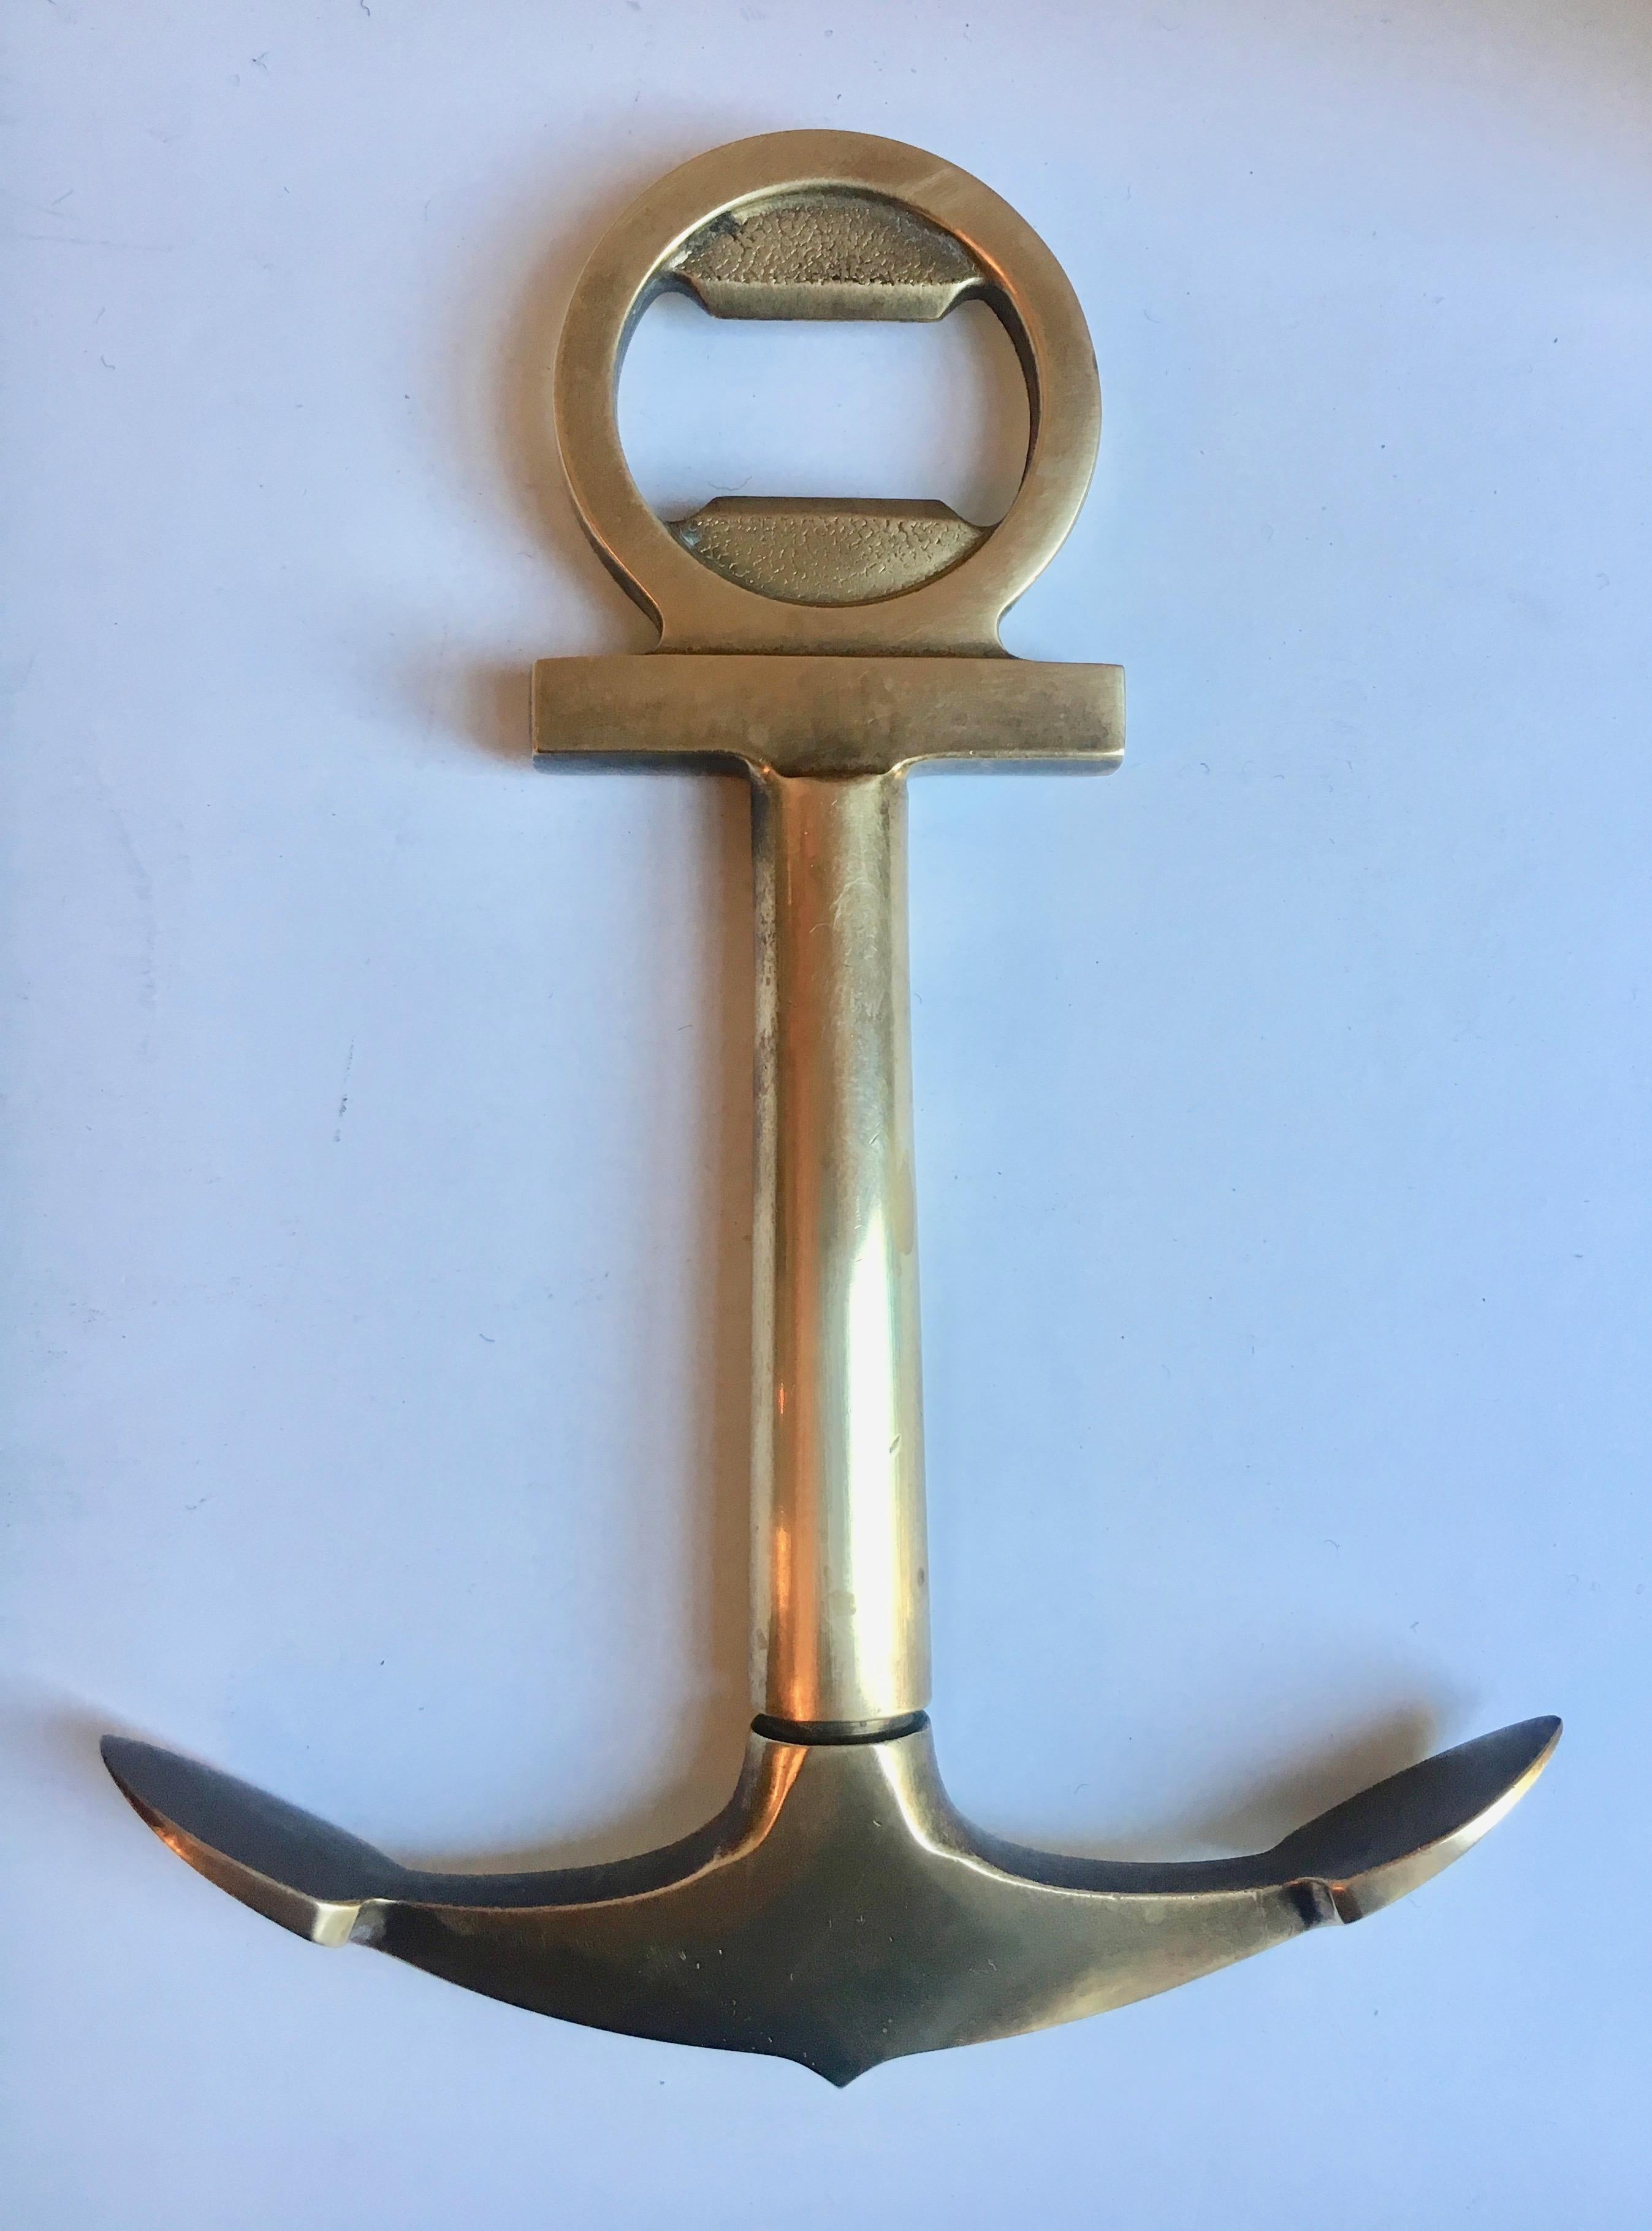 Brass anchor bottle wine opener, perfect for the boat or yacht or bar near the water!
Unscrews to reveal bottle corkscrew, made in Germany.